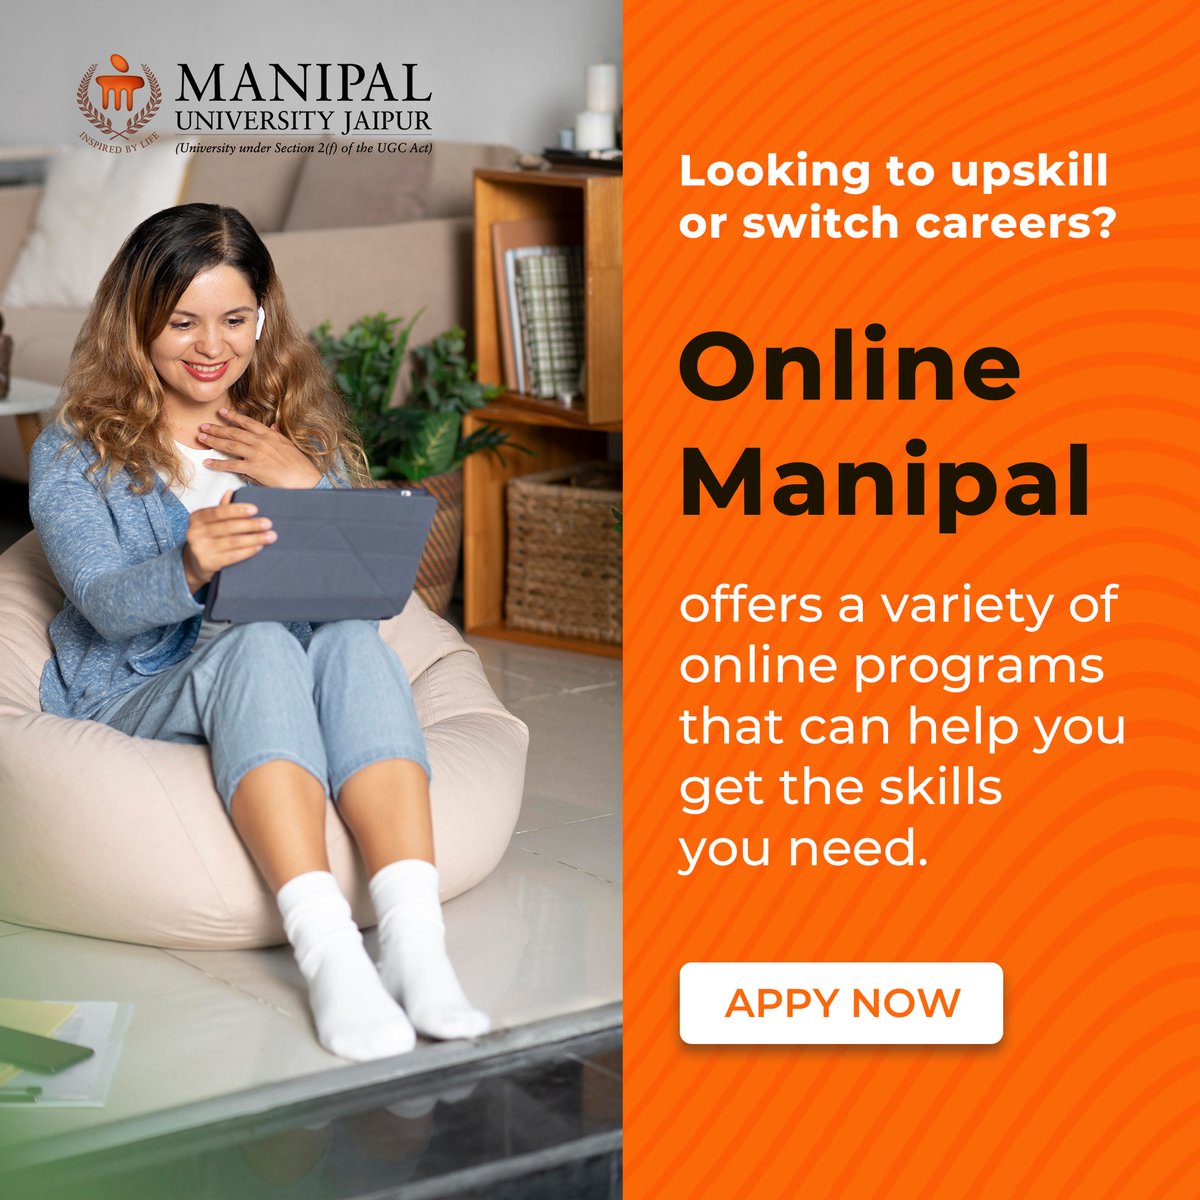 Level up your life with an online degree from Manipal University Jaipur! Ready to get started? Apply now!

For any further queries, reach us at
Contact details- +91- 8336889553
WhatsApp:- wa.me/message/TINDX5…

#EduKyu #Kyukibadhnajarurihai #OnlineManipal #ManipalUniversity